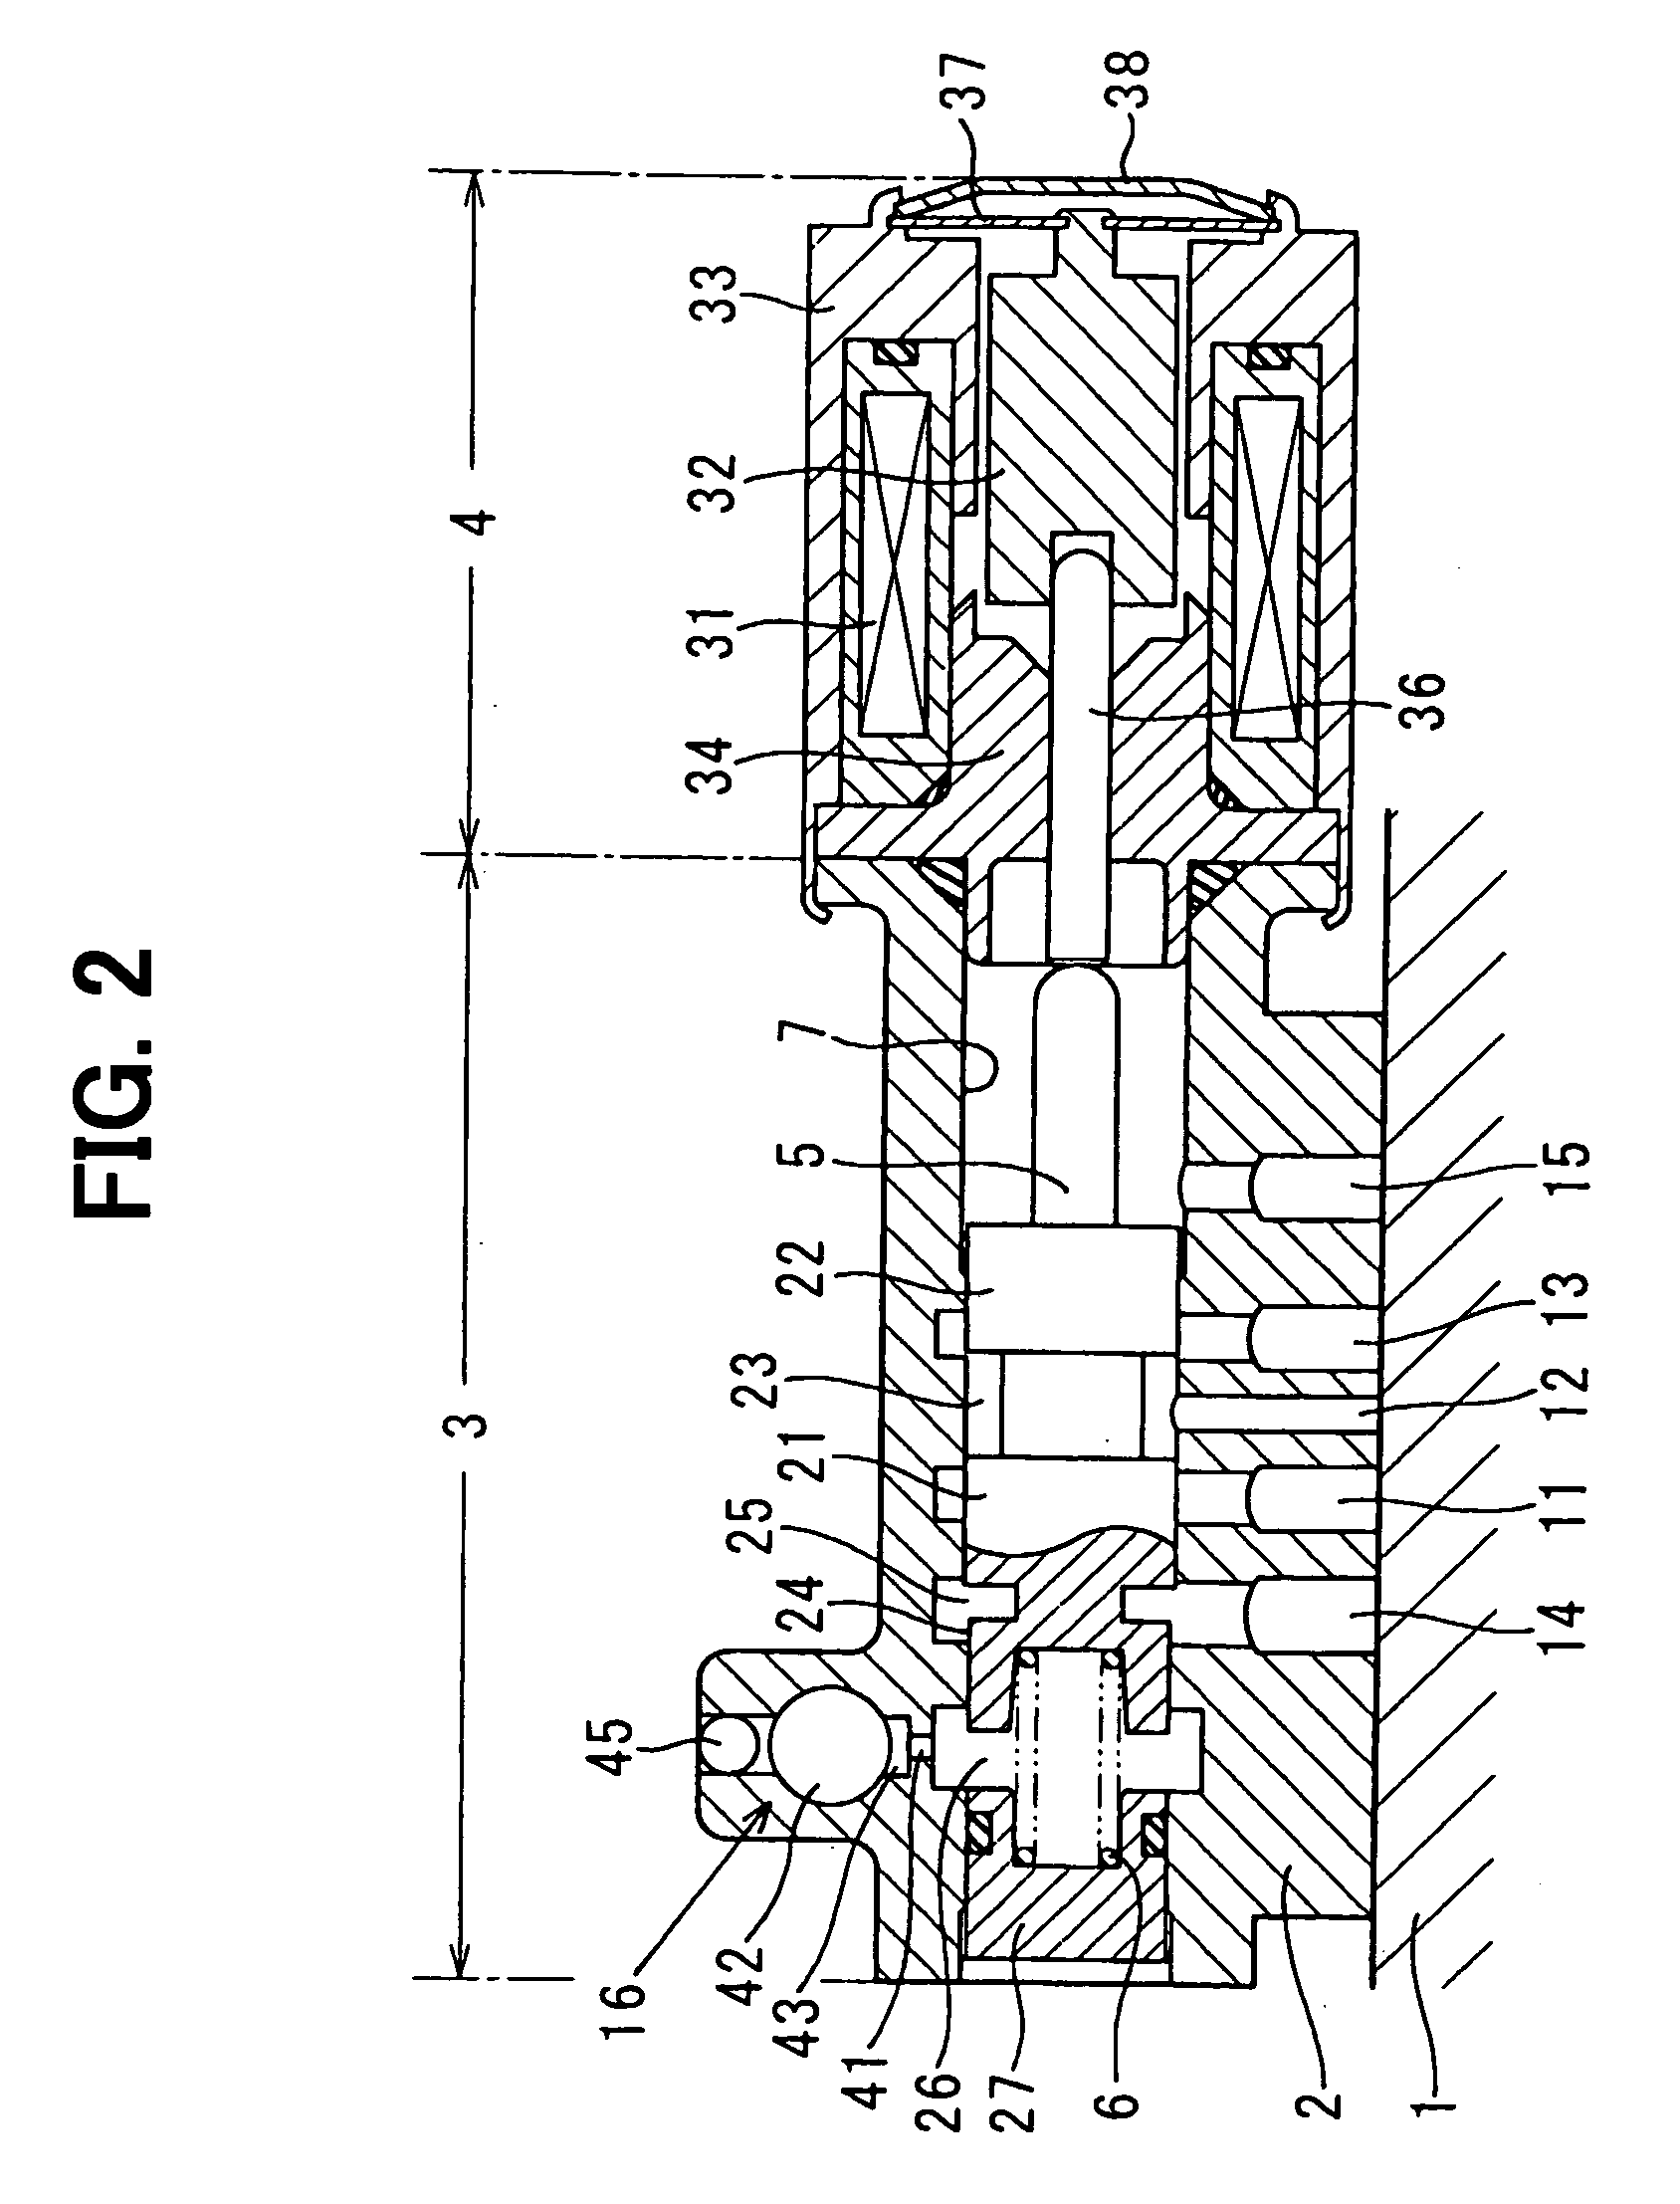 Oil pressure control device having a damper for suppressing pressure dither